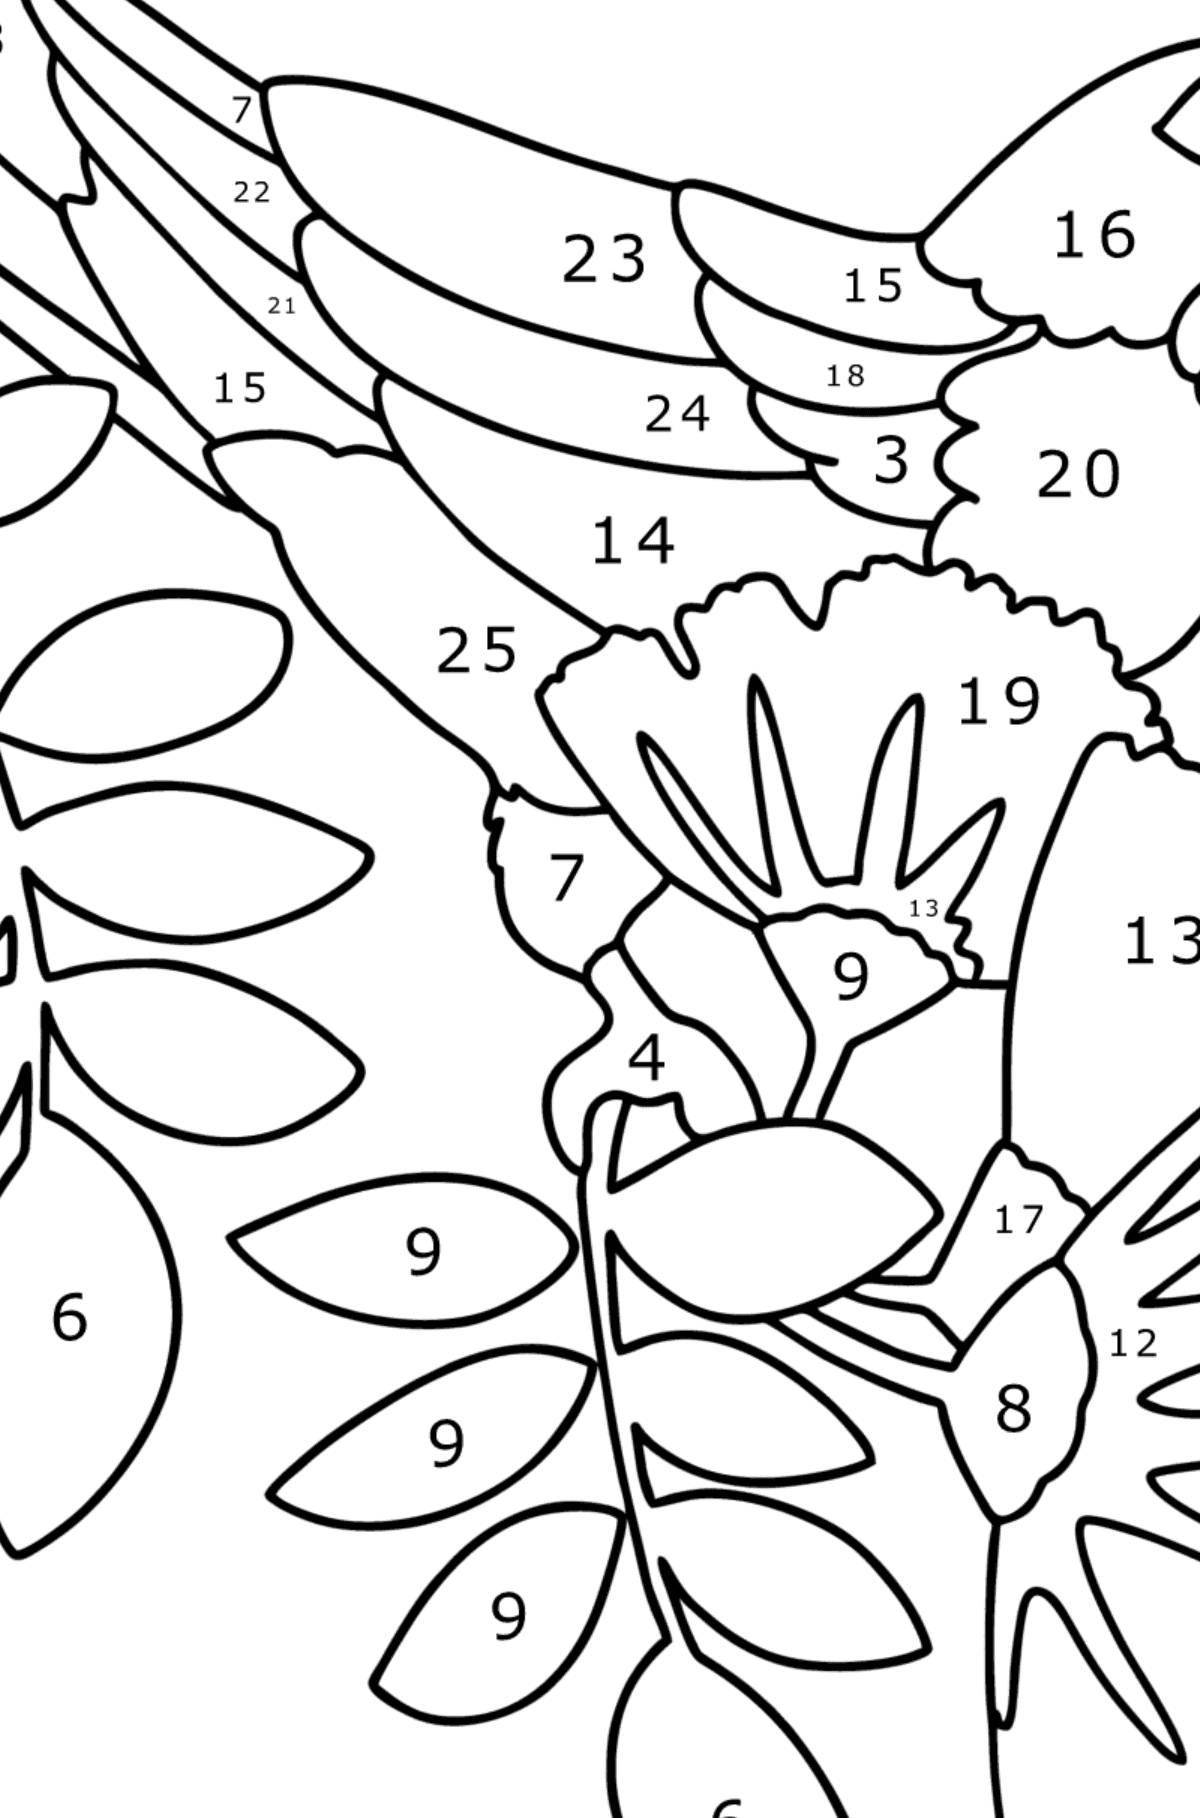 Adorable parrot by number coloring book